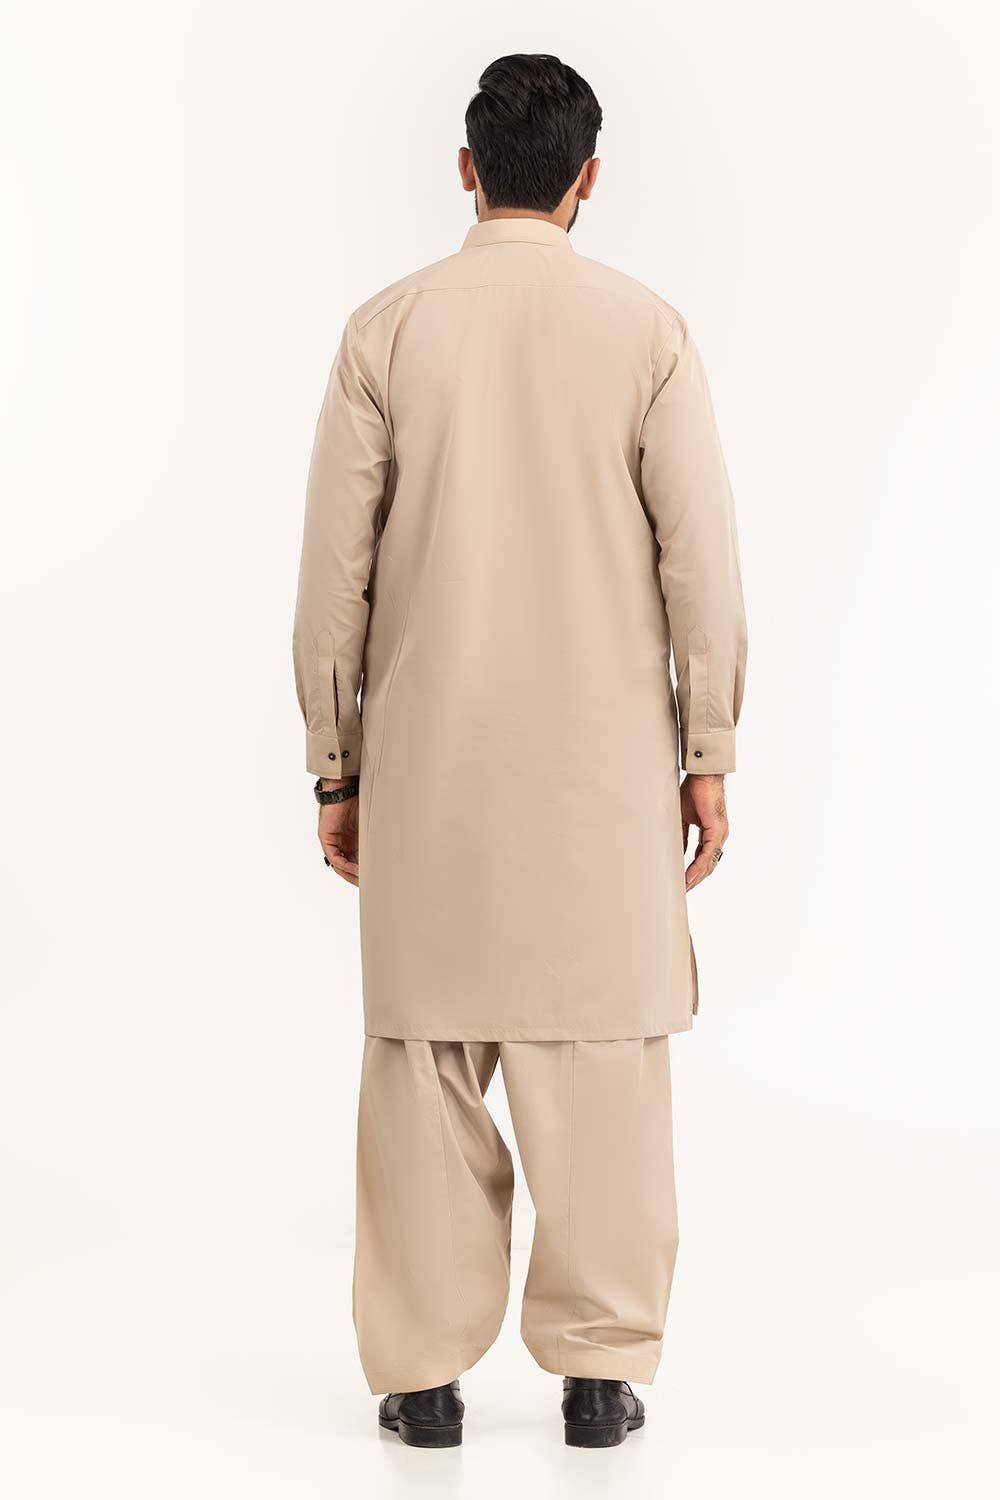 Gul Ahmed Ready to Wear Men's Fawn Styling Suit SK-S22-023